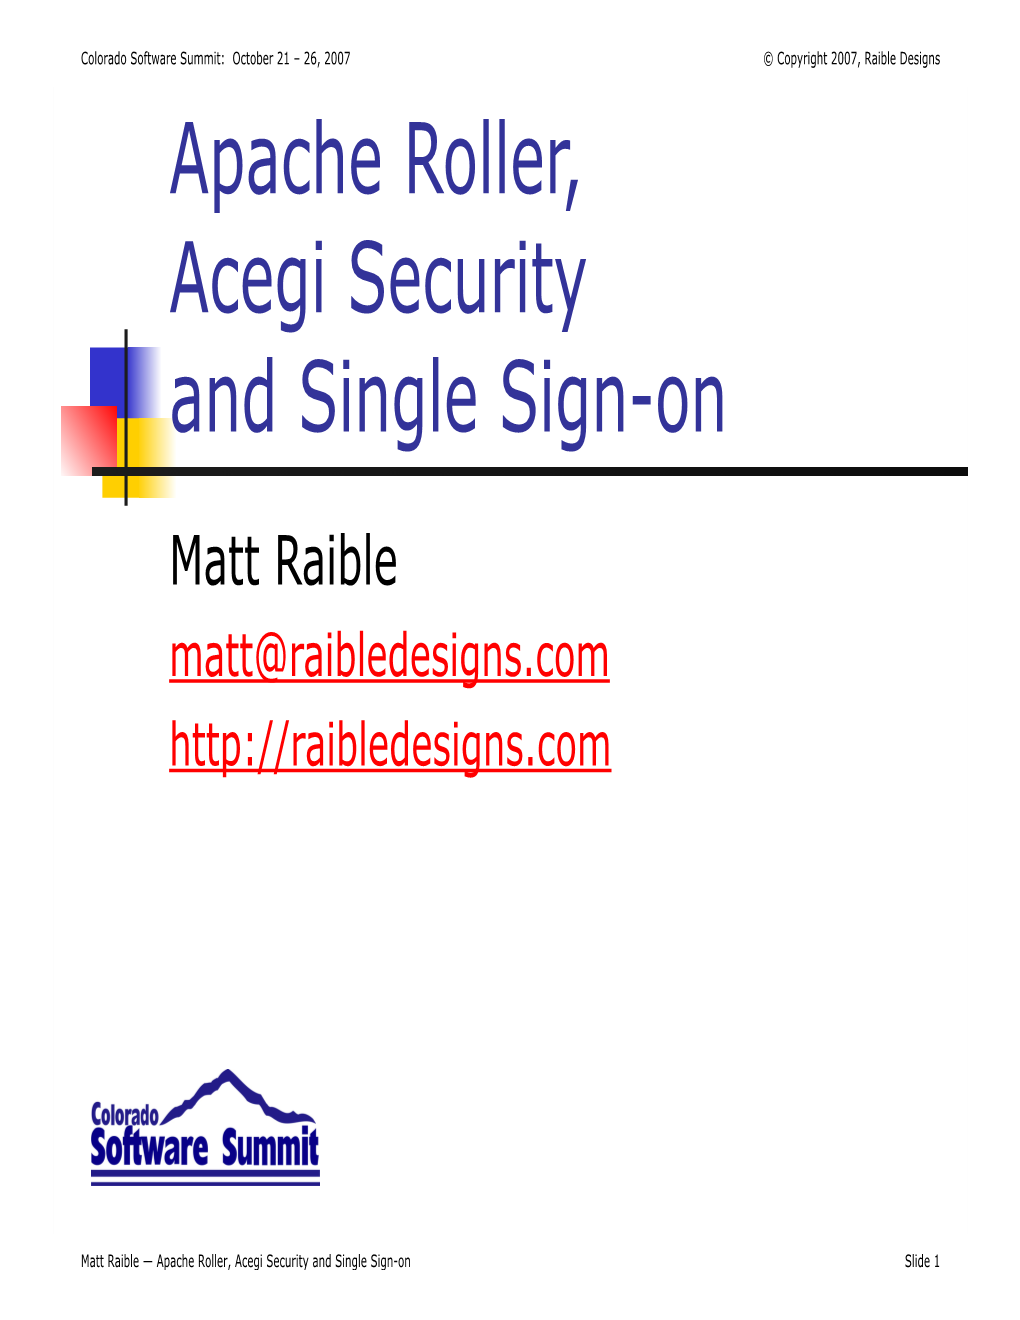 Apache Roller, Acegi Security and Single Sign-On